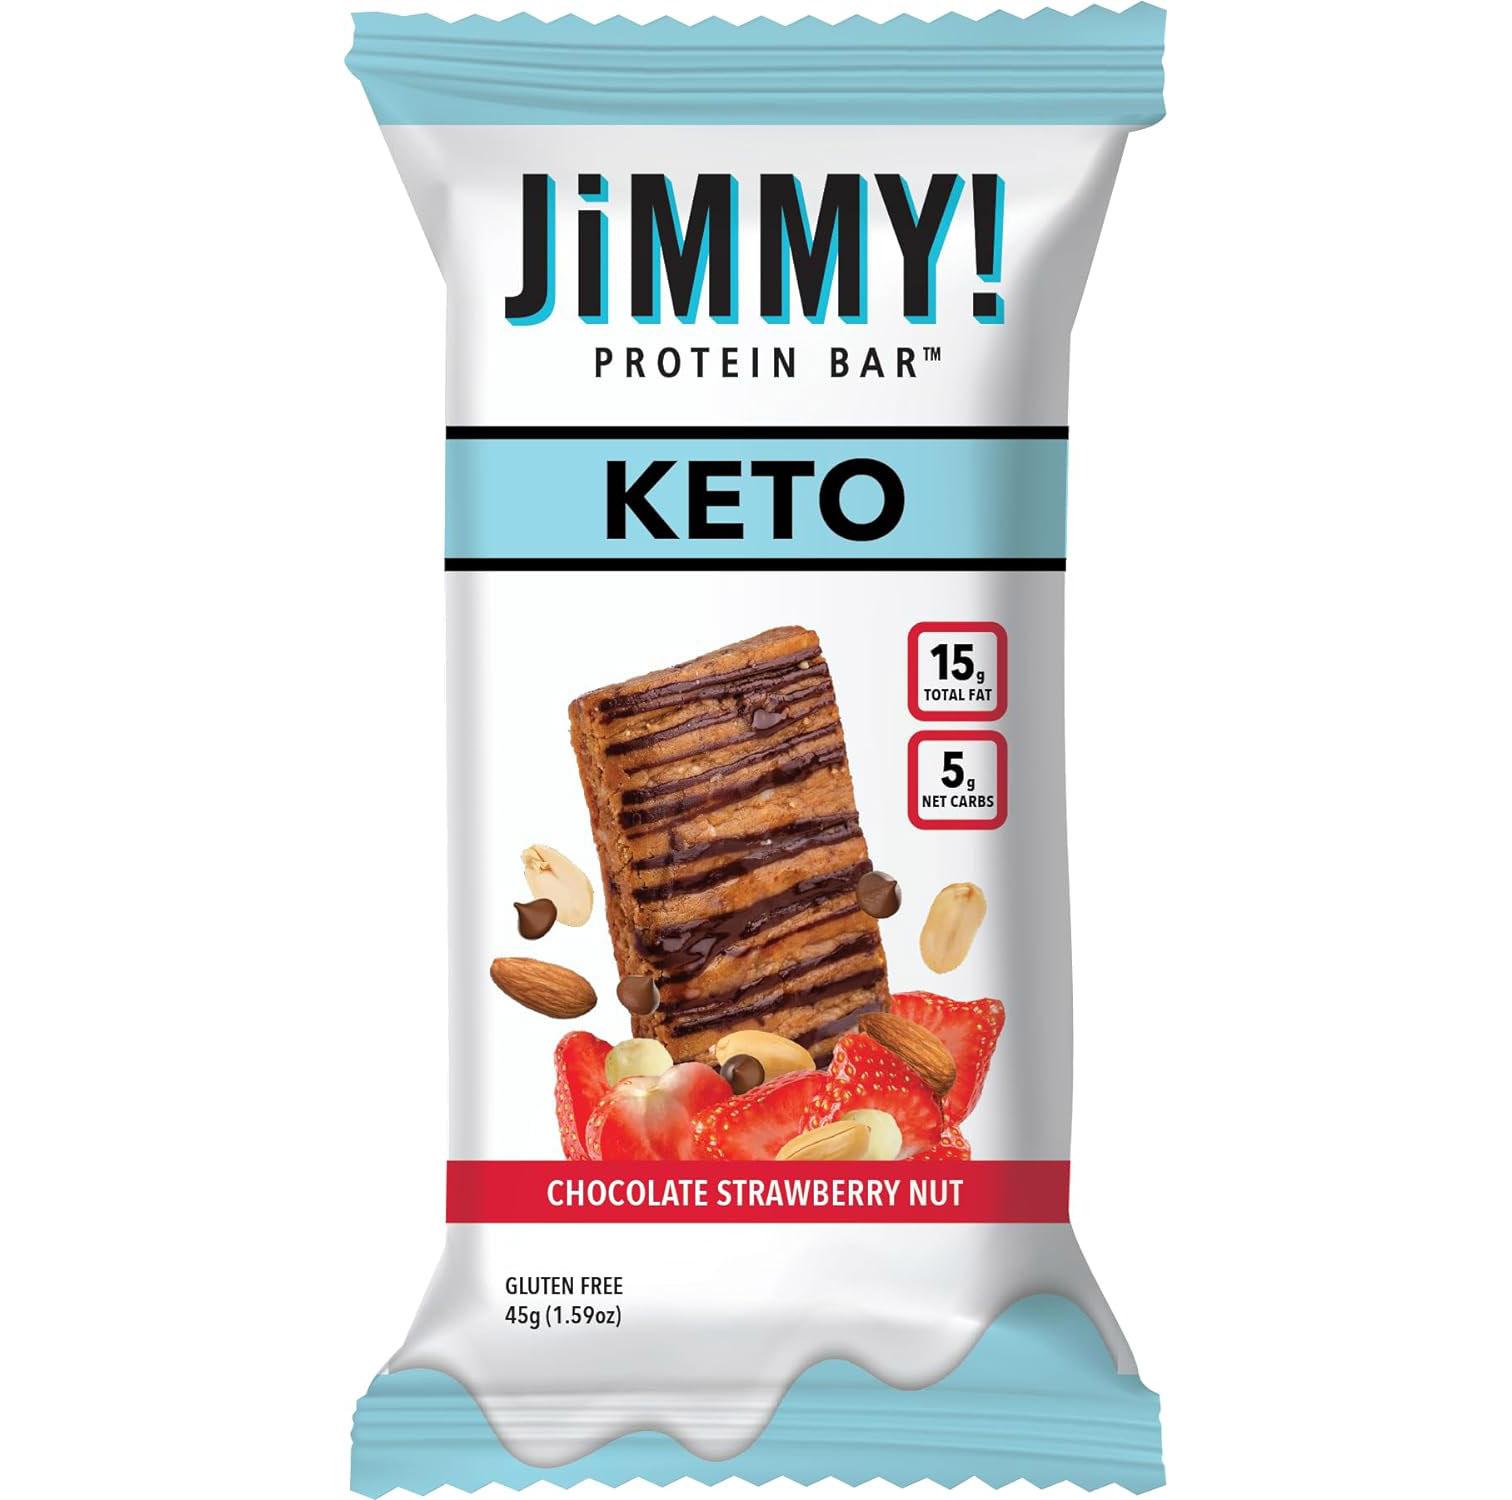 JiMMY Keto Energy Protein Bars 12 Pack for $9.86 Shipped